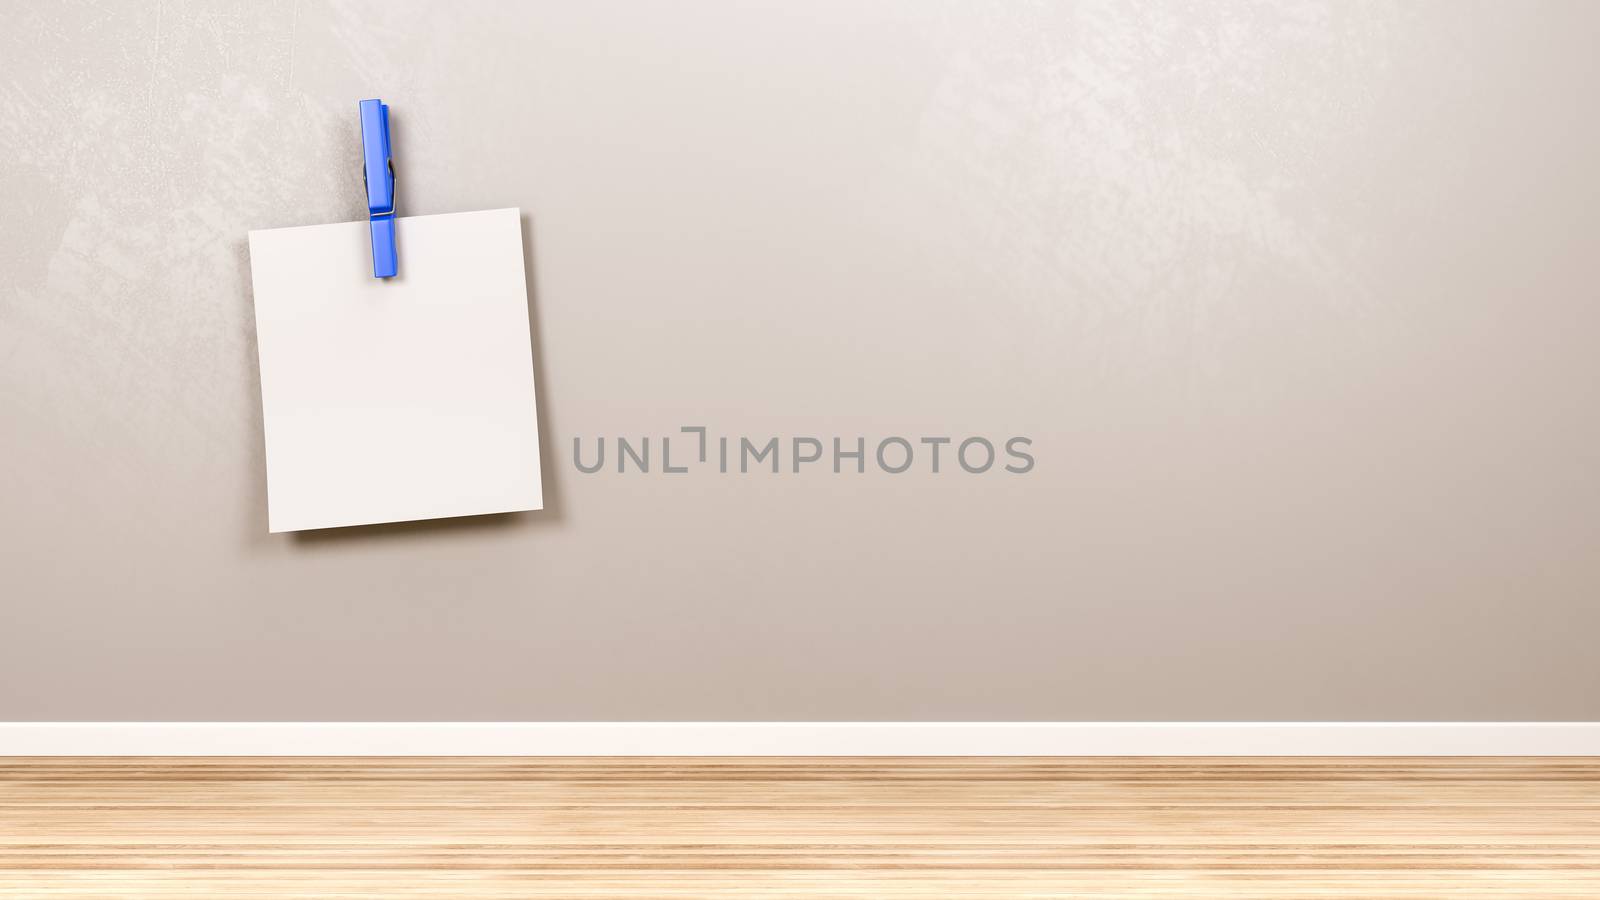 Blank Paper Note with Blue Clothespin Against Gray Wall in the Room with Copyspace 3D Illustration